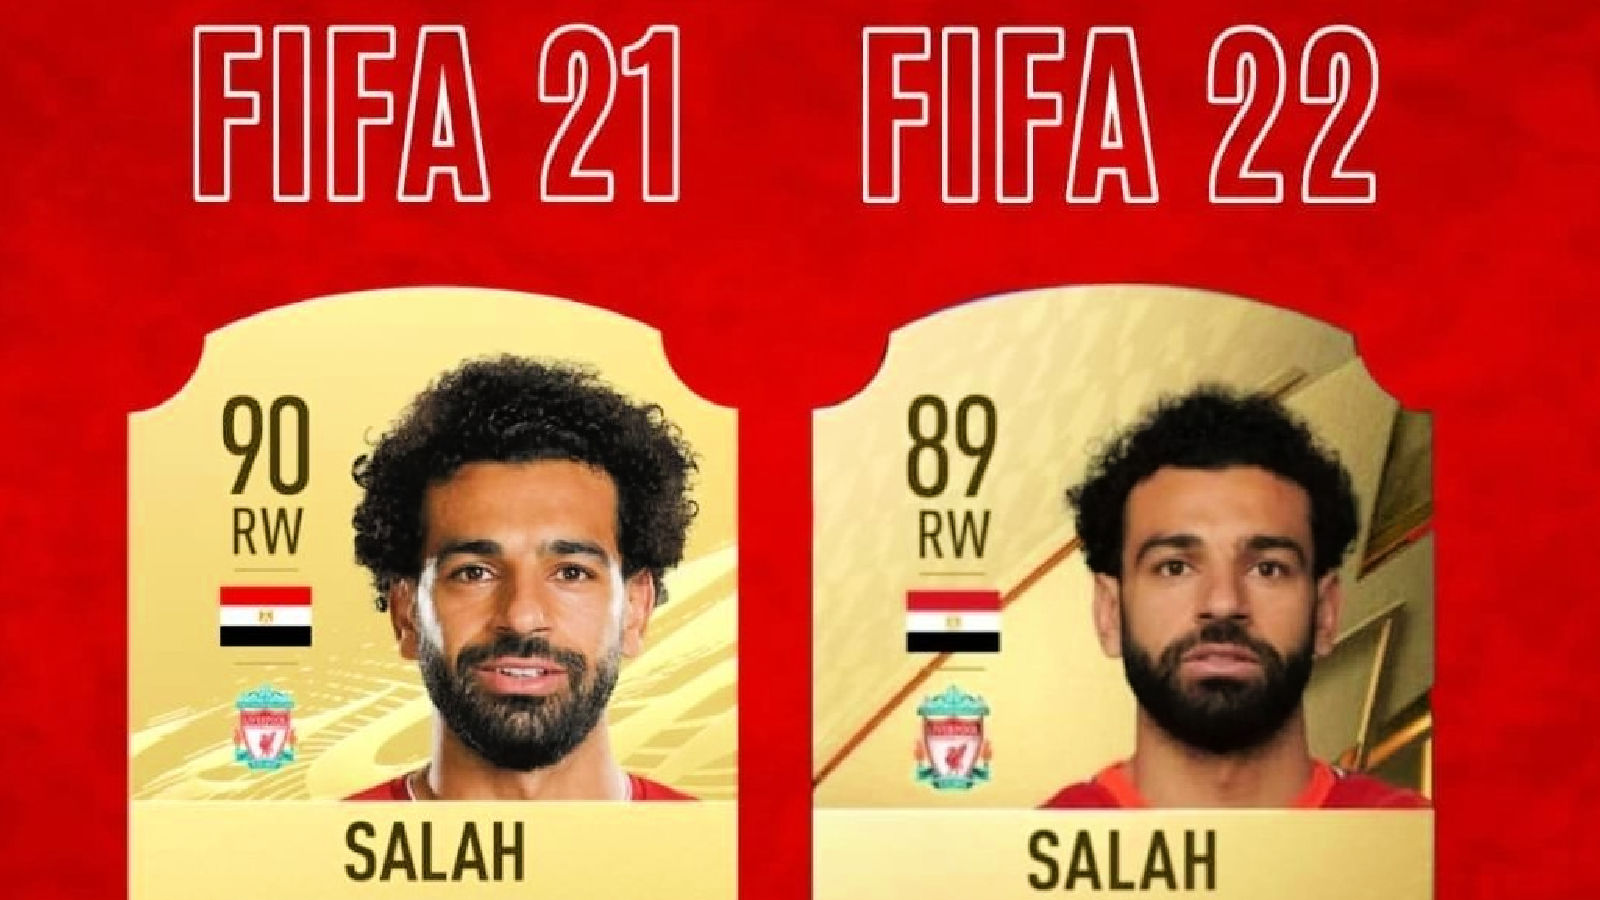 Mohamed Salah with a downgrade in FIFA 22